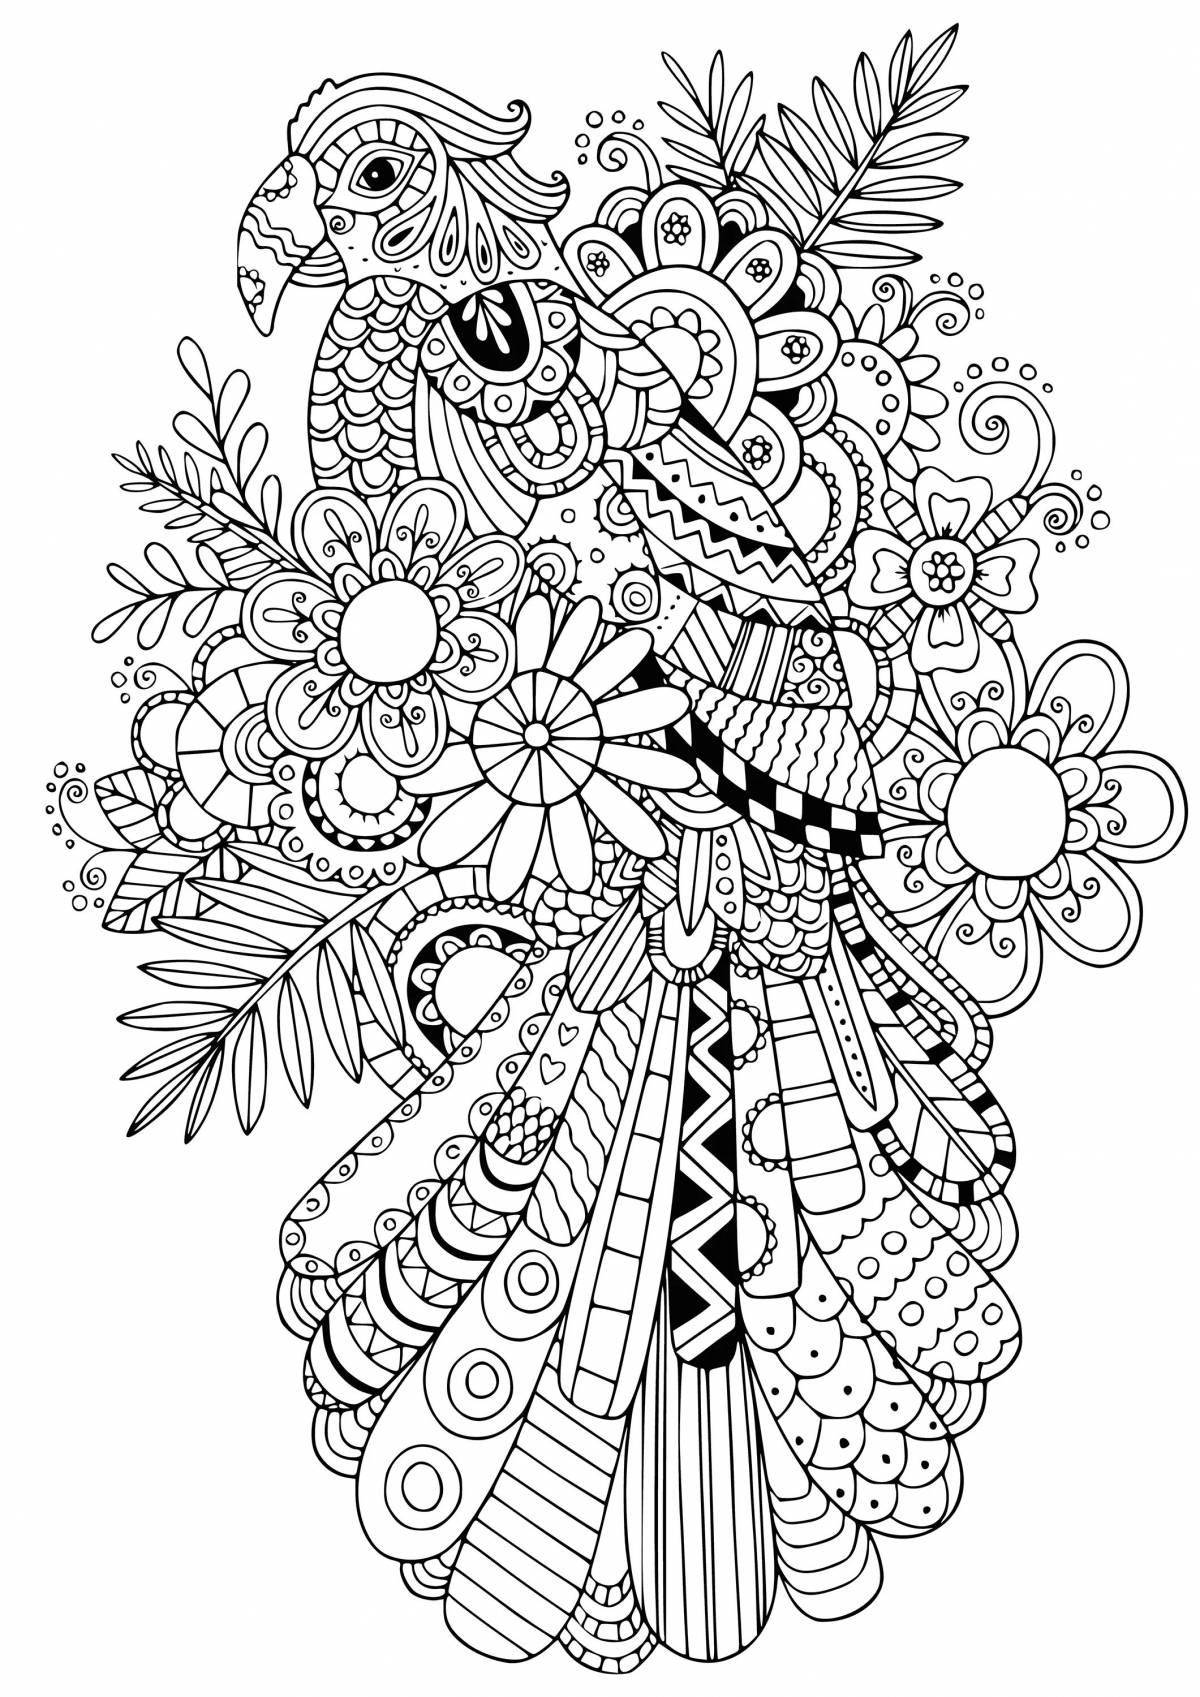 Stimulating coloring art therapy for children